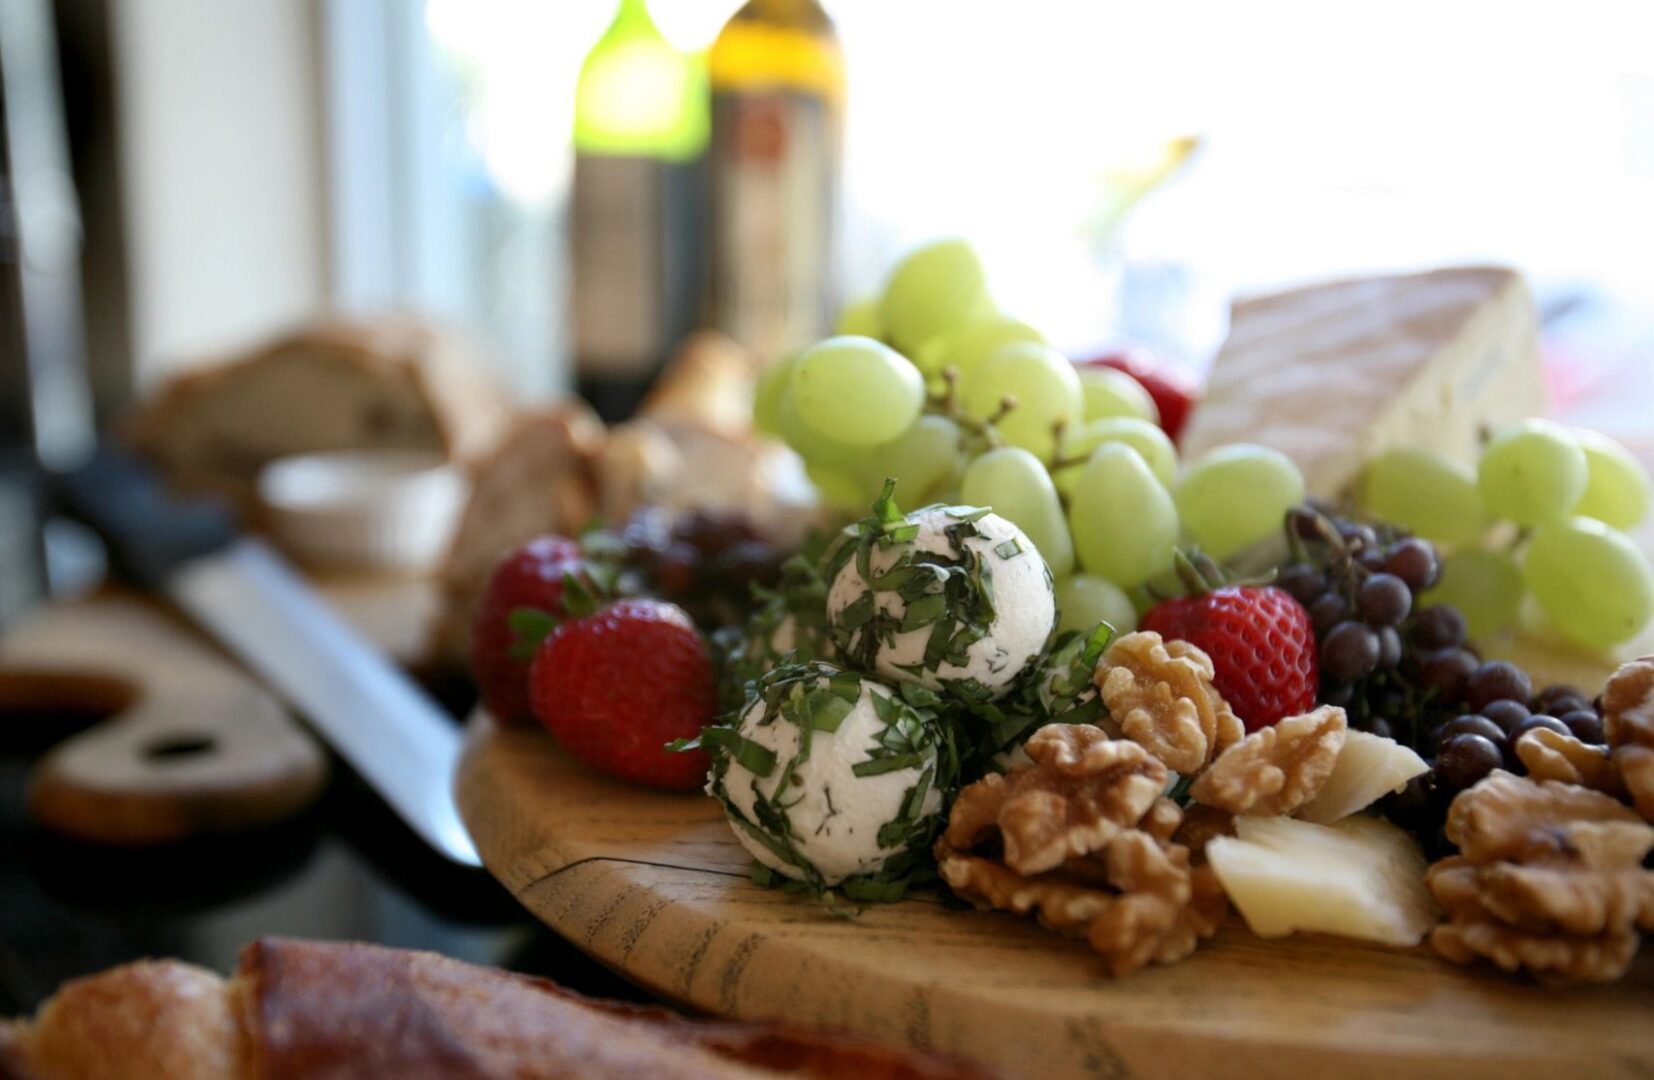 A wooden platter with grapes, cheese and nuts.